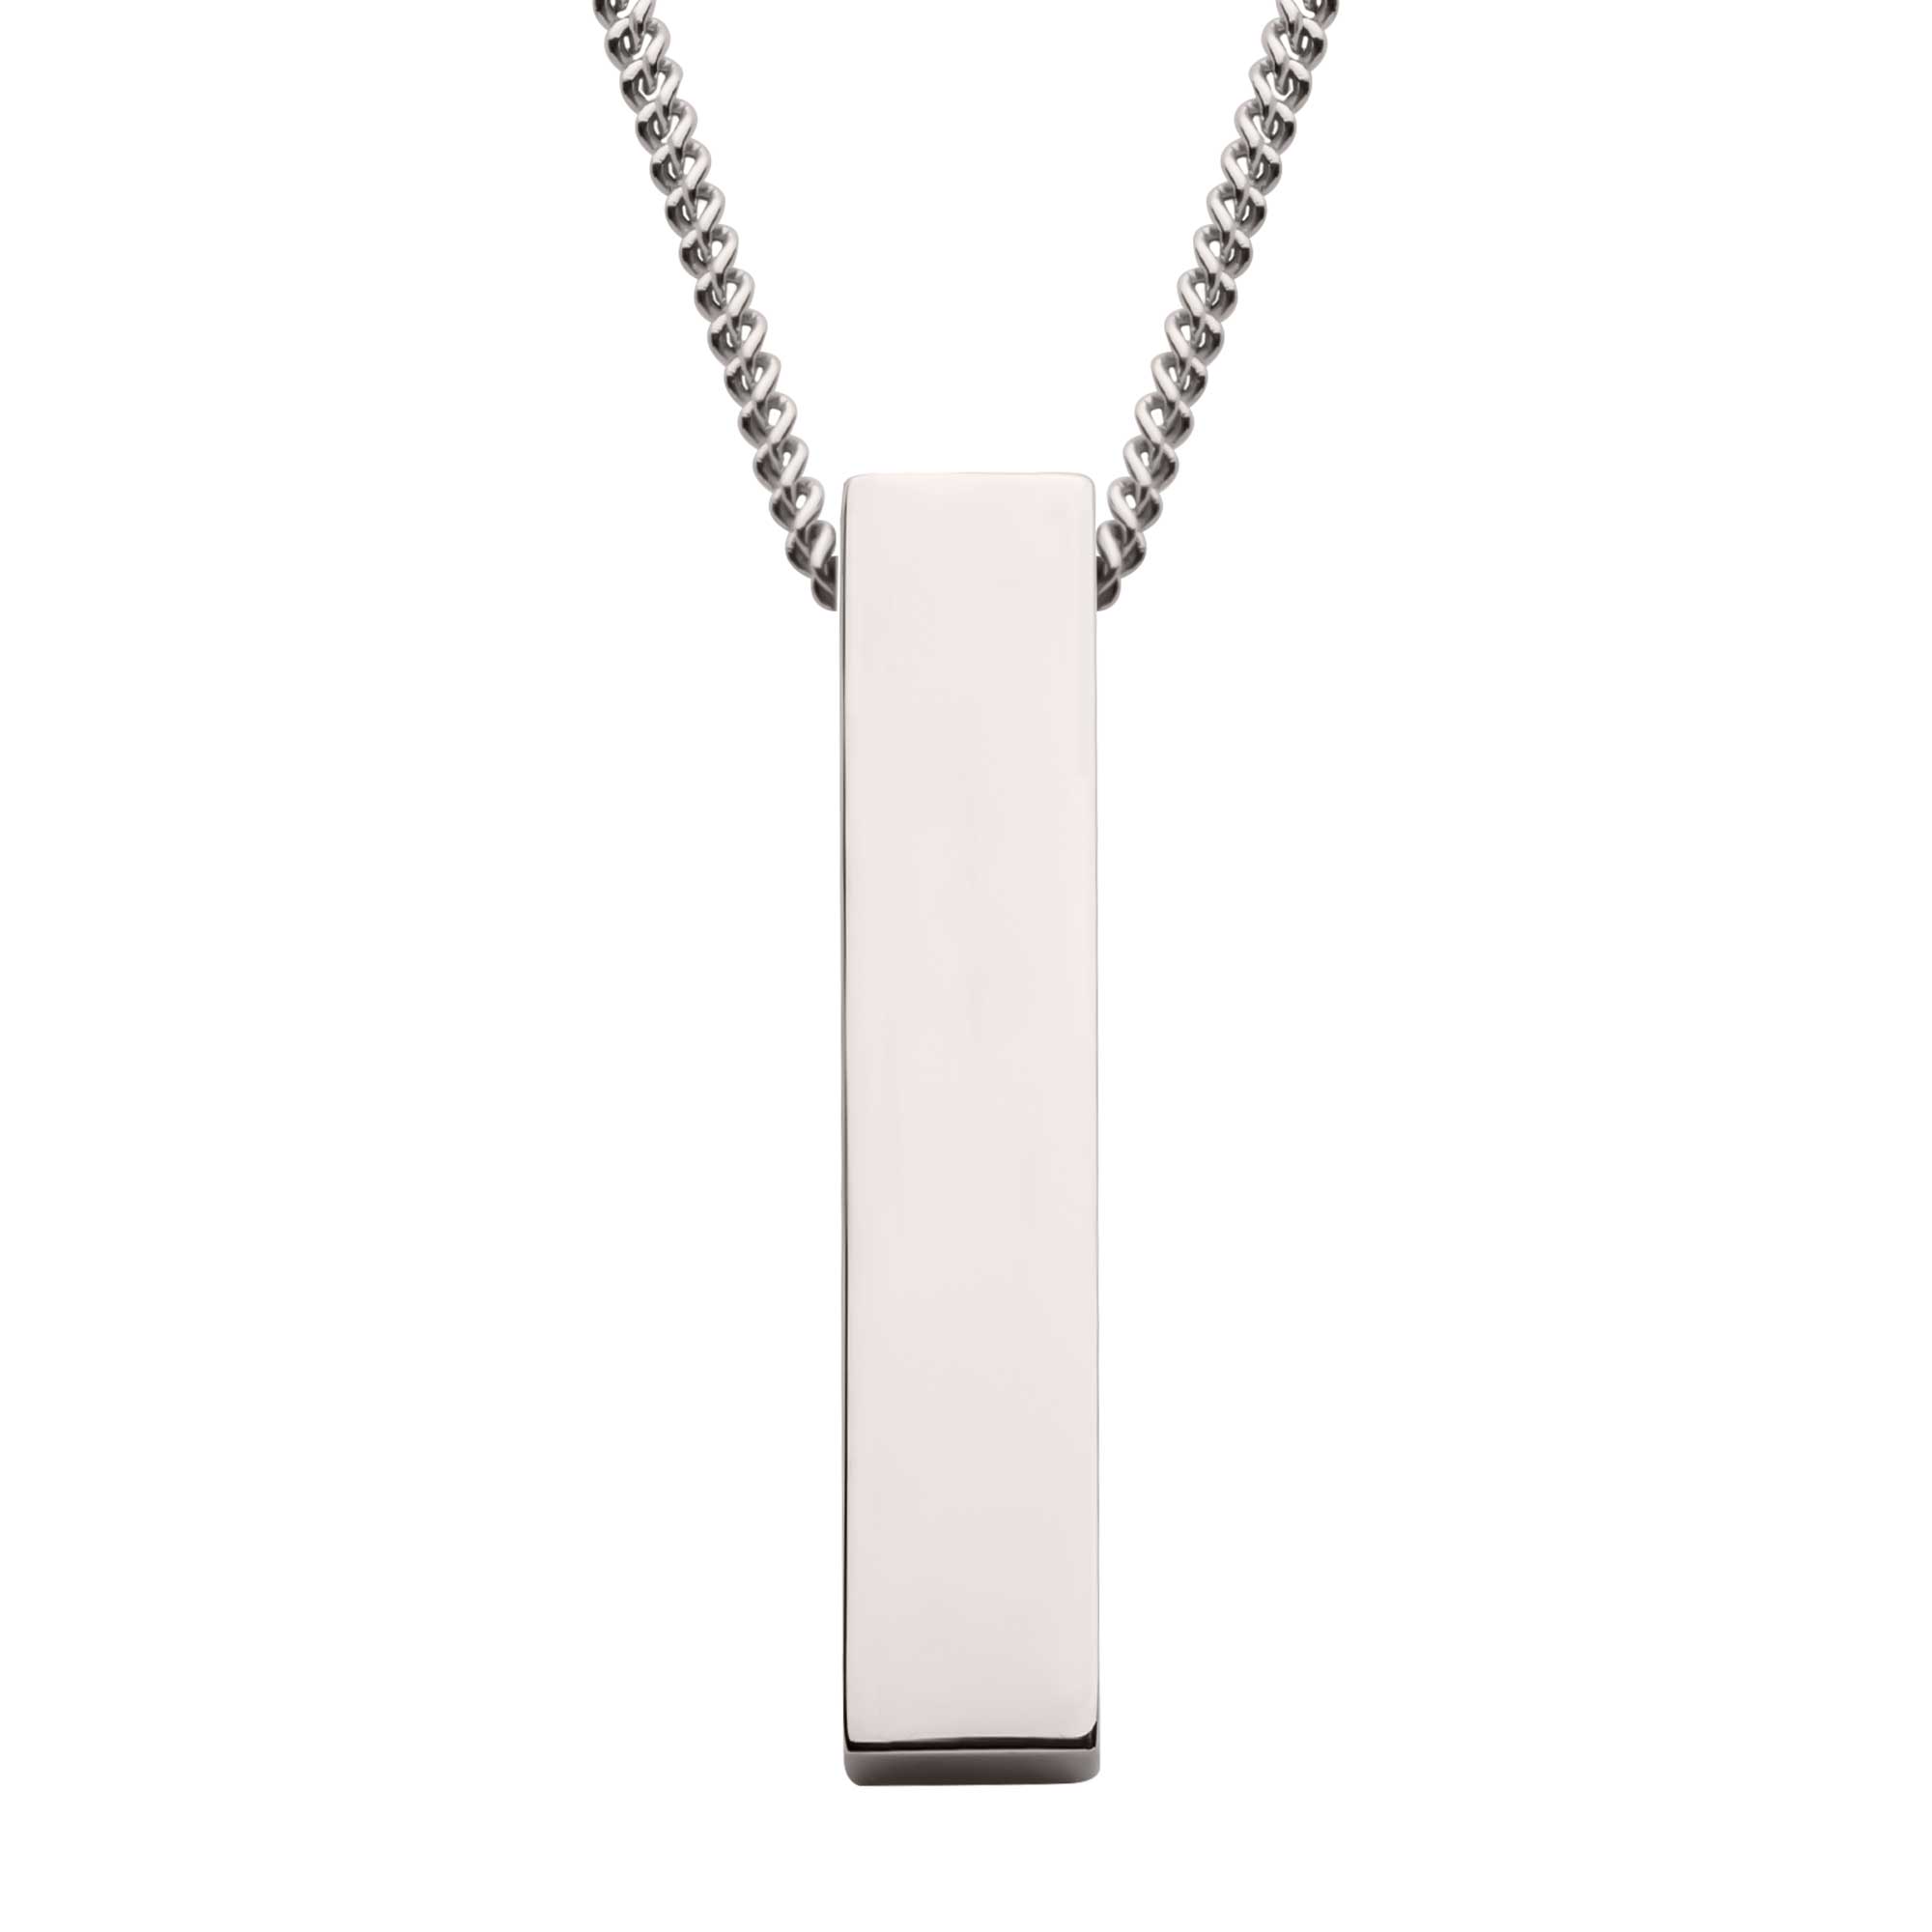 The Monolith Engravable Pendant with Chain P.K. Bennett Jewelers Mundelein, IL